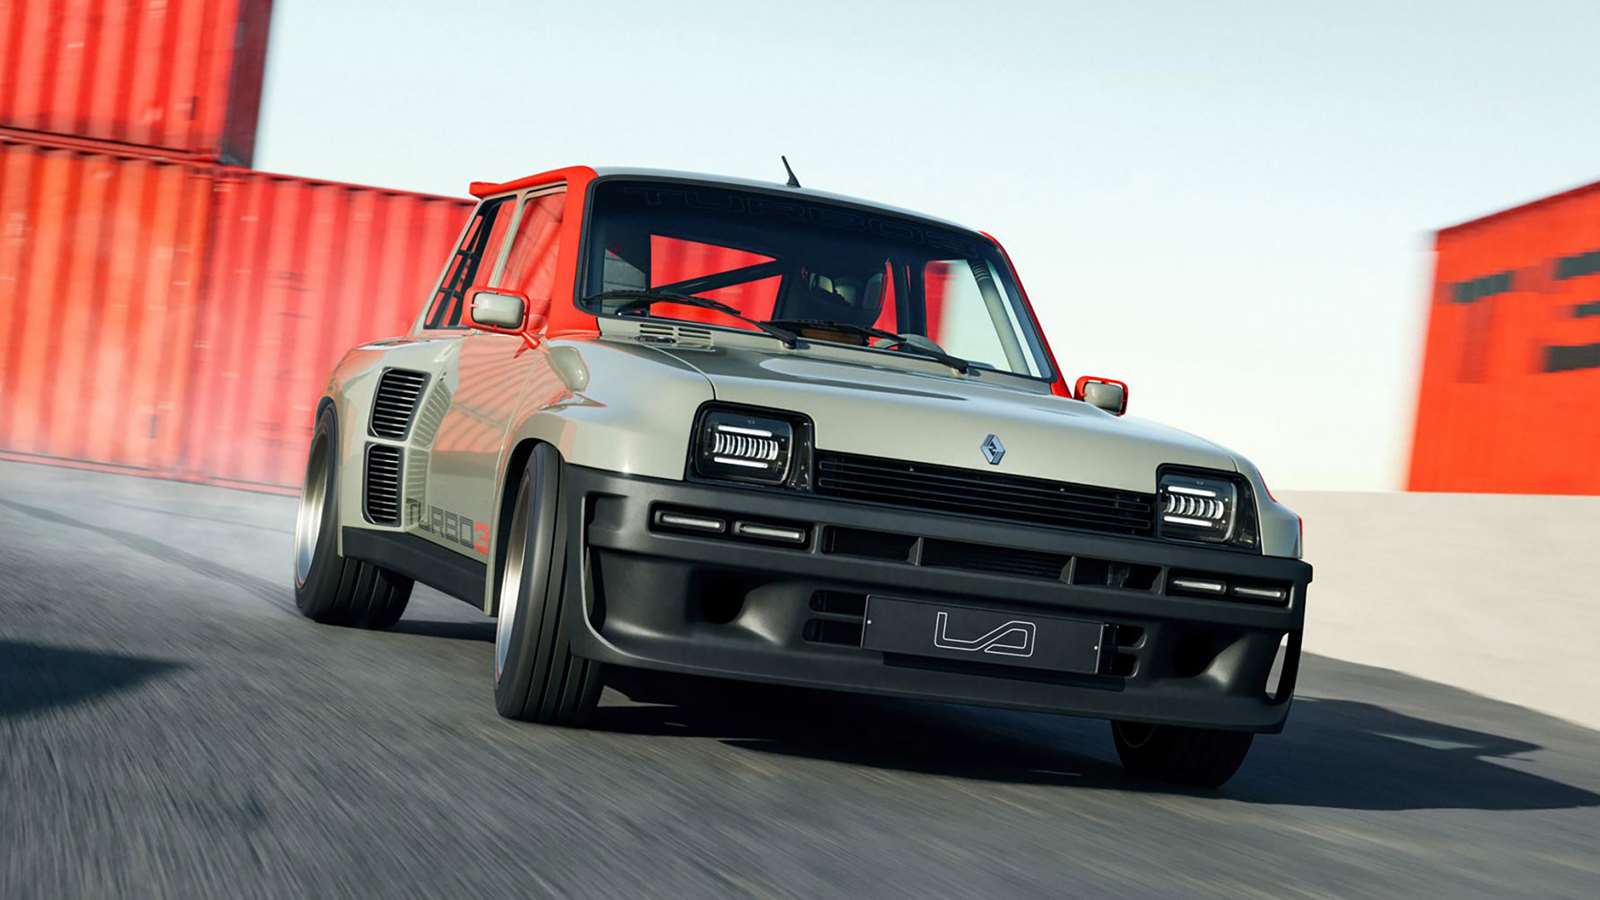 The Turbo 3 is a reinvented Renault 5